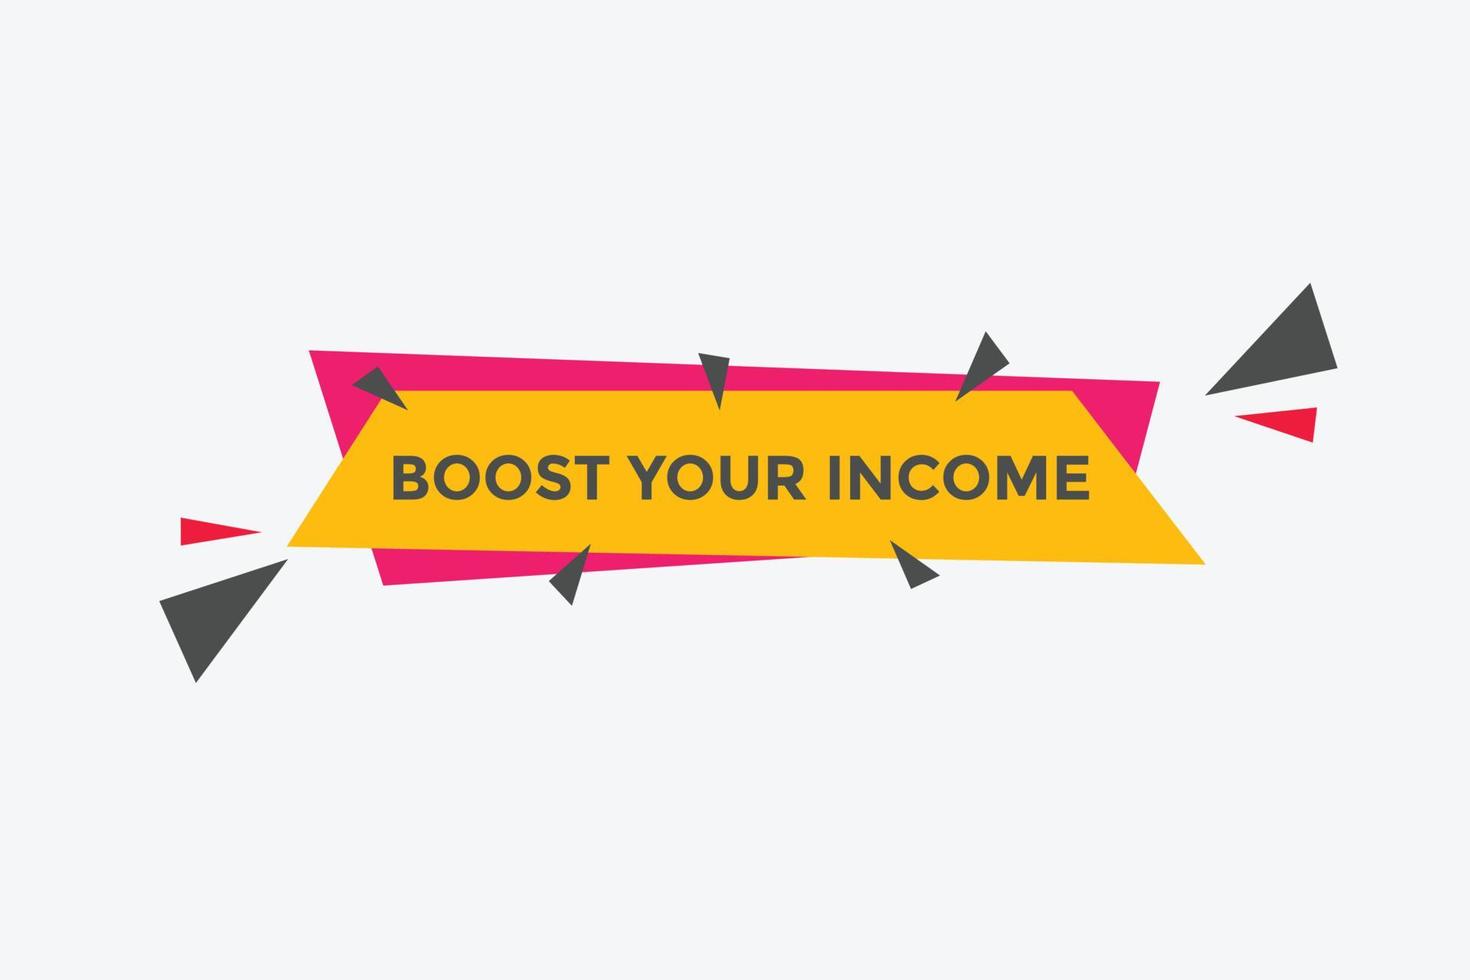 Boost your income button. speech bubble. Boost you, income Colorful web banner. vector illustration